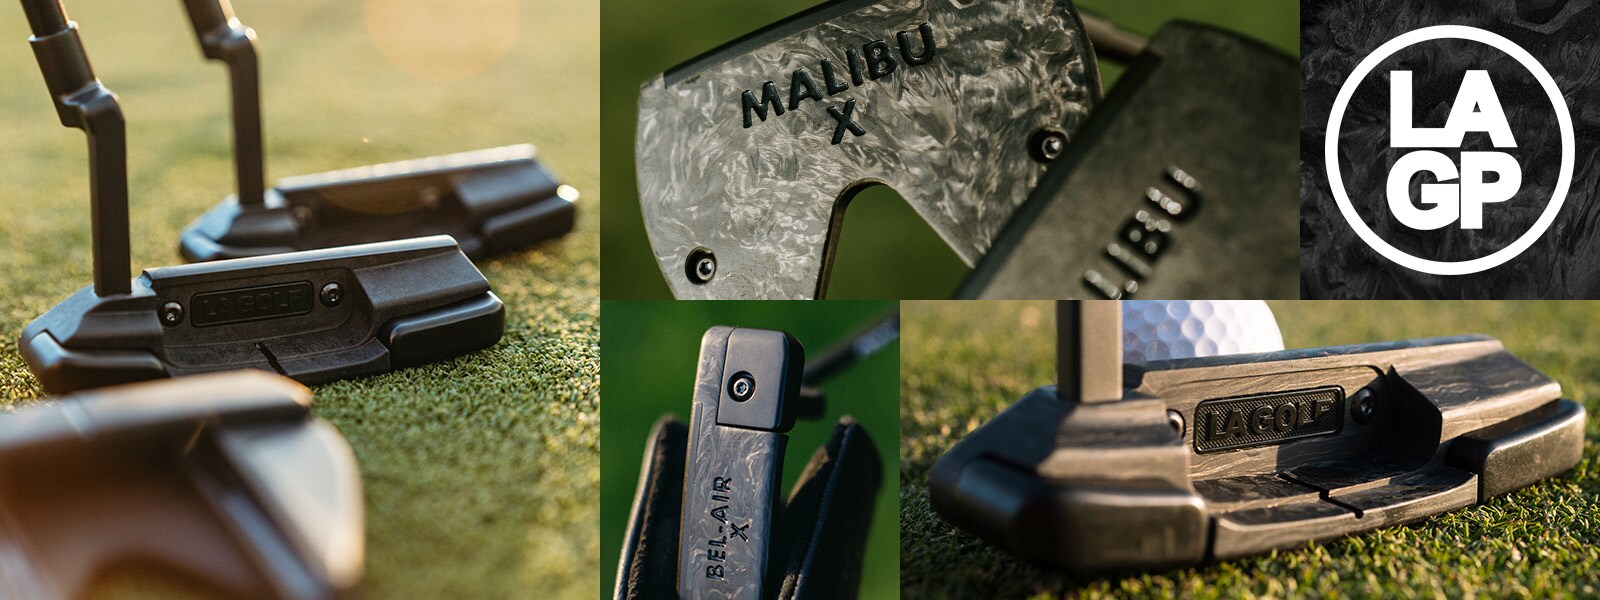 An image of LA Golf Putters.